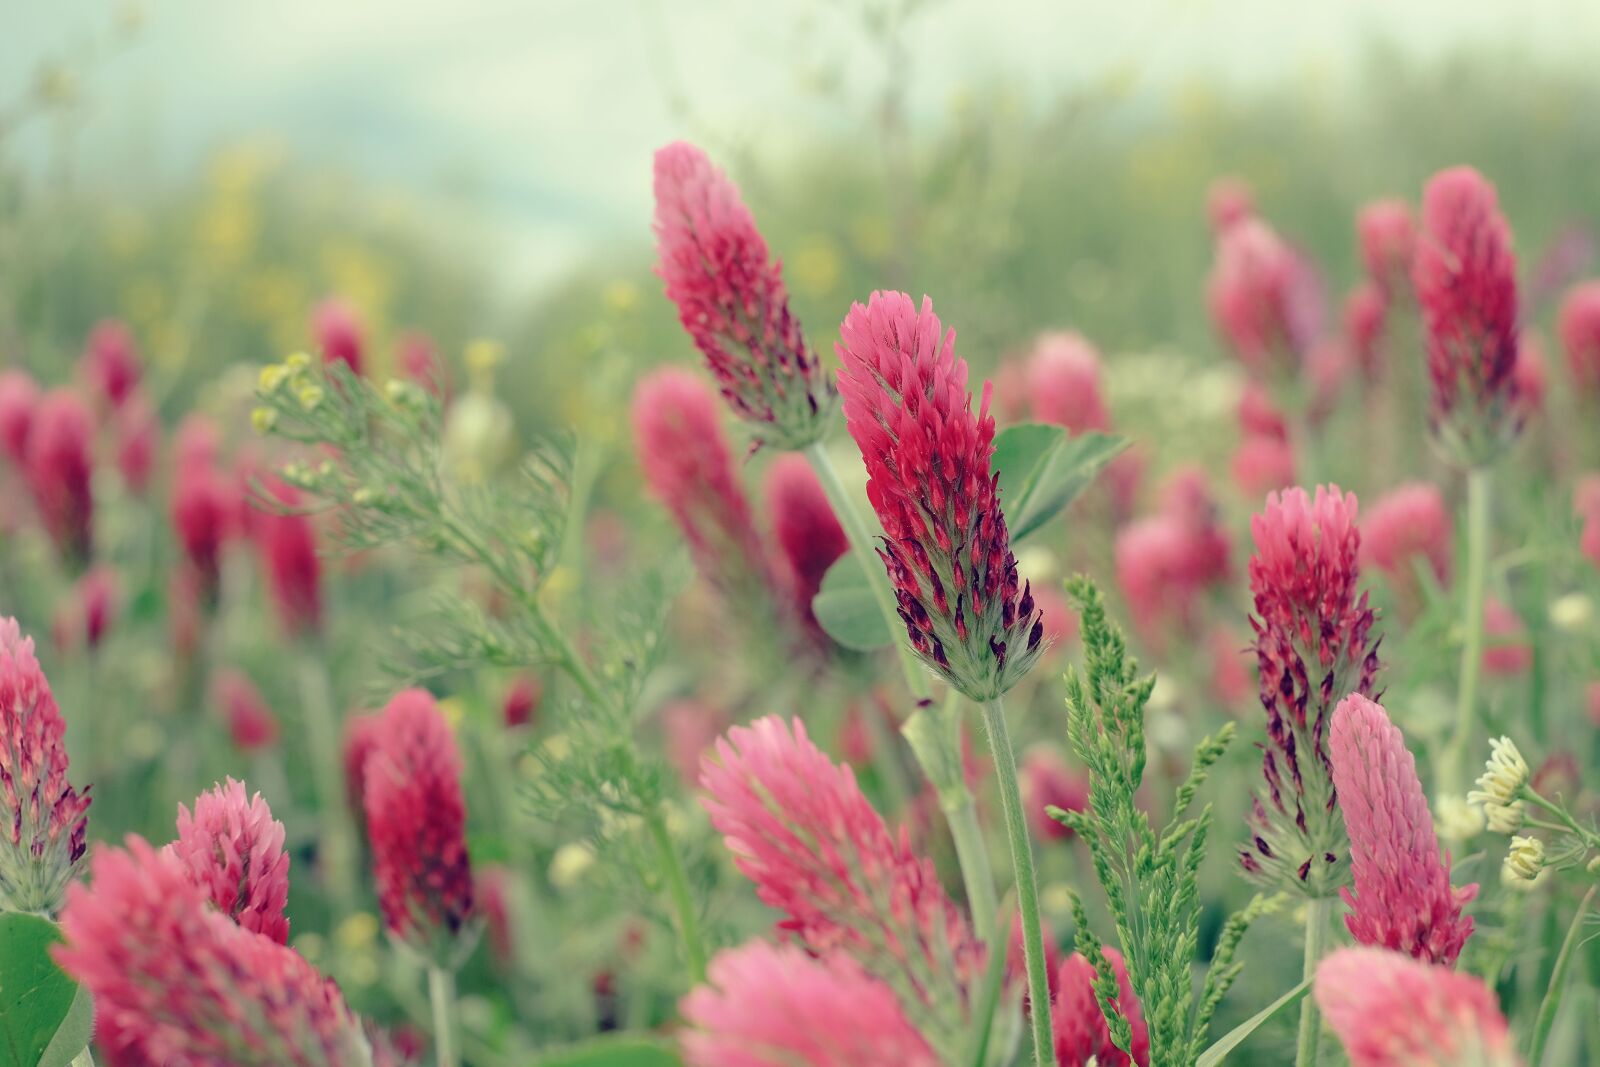 Fujifilm X-T20 sample photo. Nature, plant, red clover photography